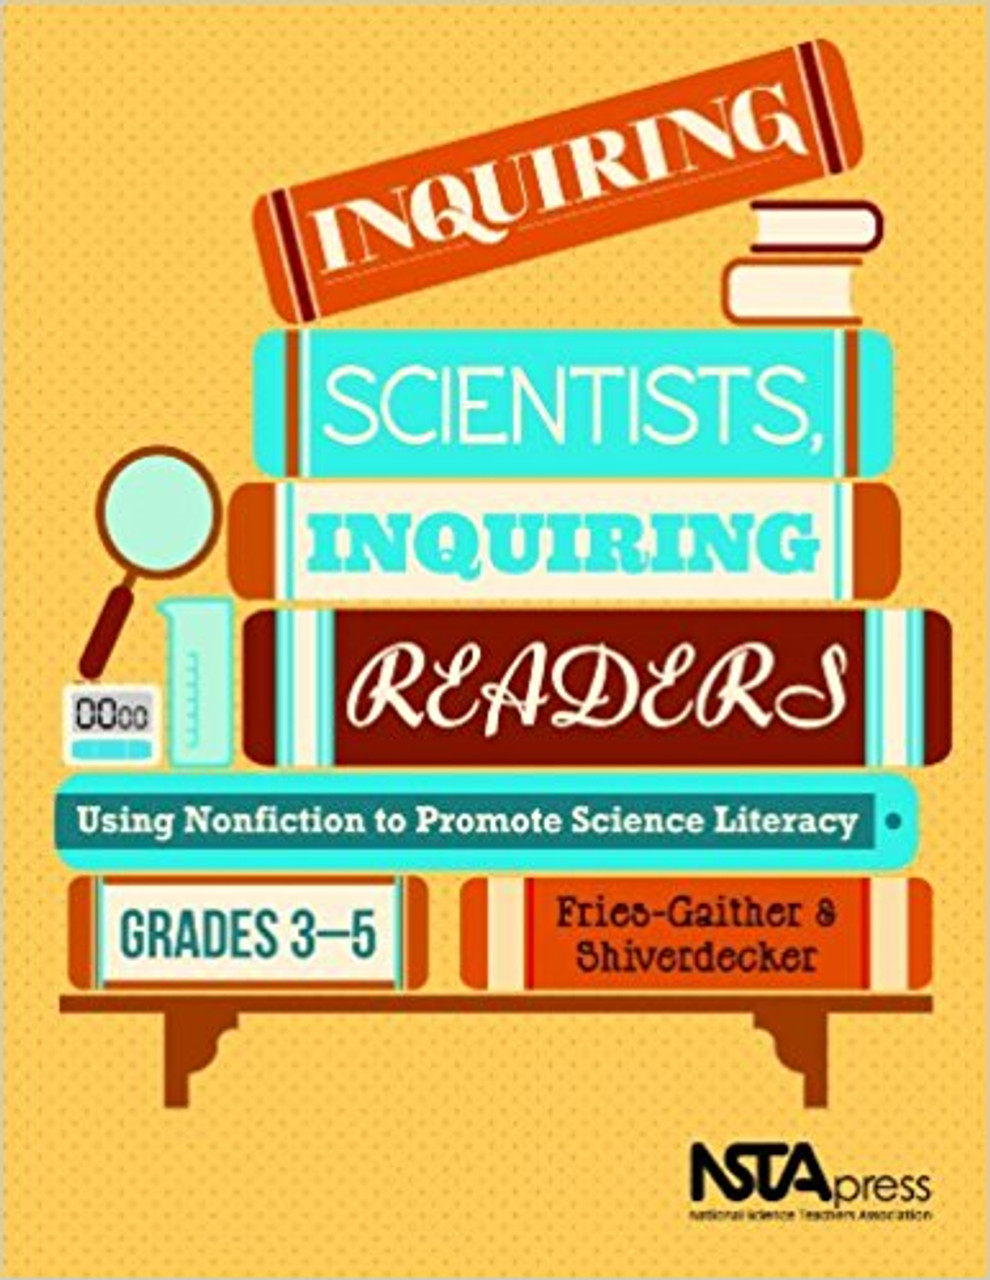 Inquiring Scientists, Inquiring Readers: Using Nonfiction to Promote Science Literacy, Grades 3-5 by Jessica Fries-Gaither